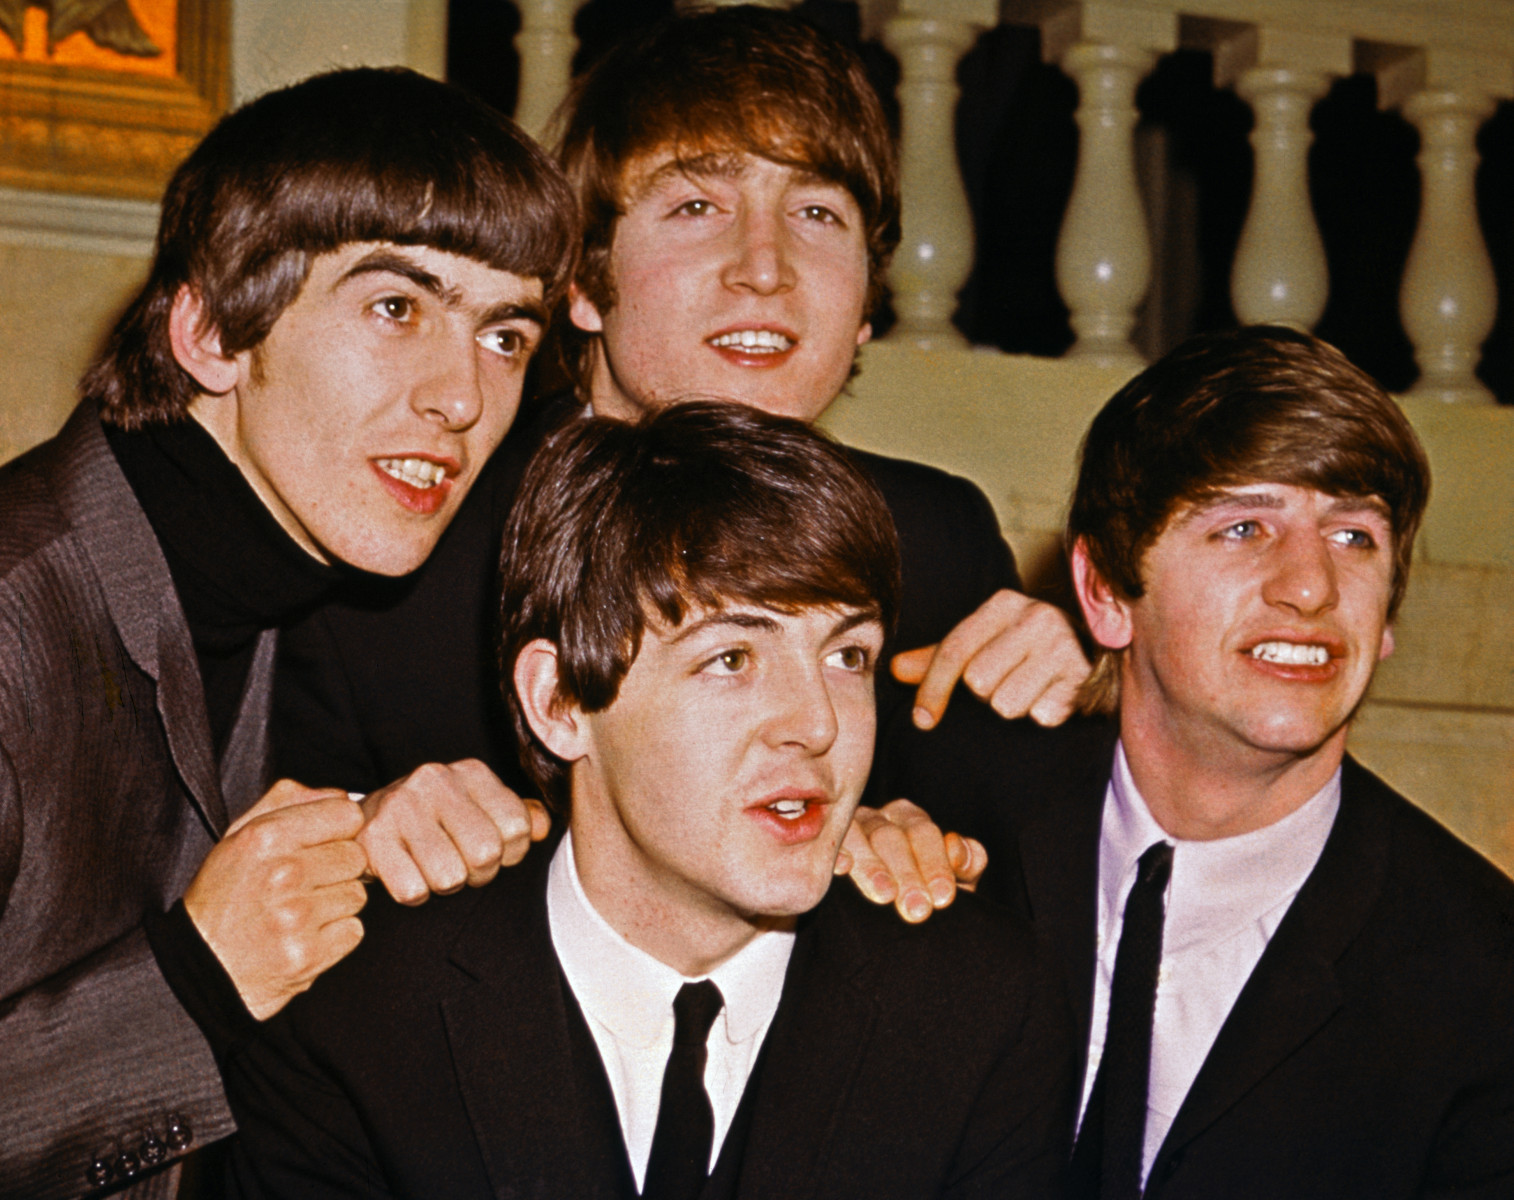 Most People Can’t Get 12/15 on This General Knowledge Quiz — Can You? The Beatles